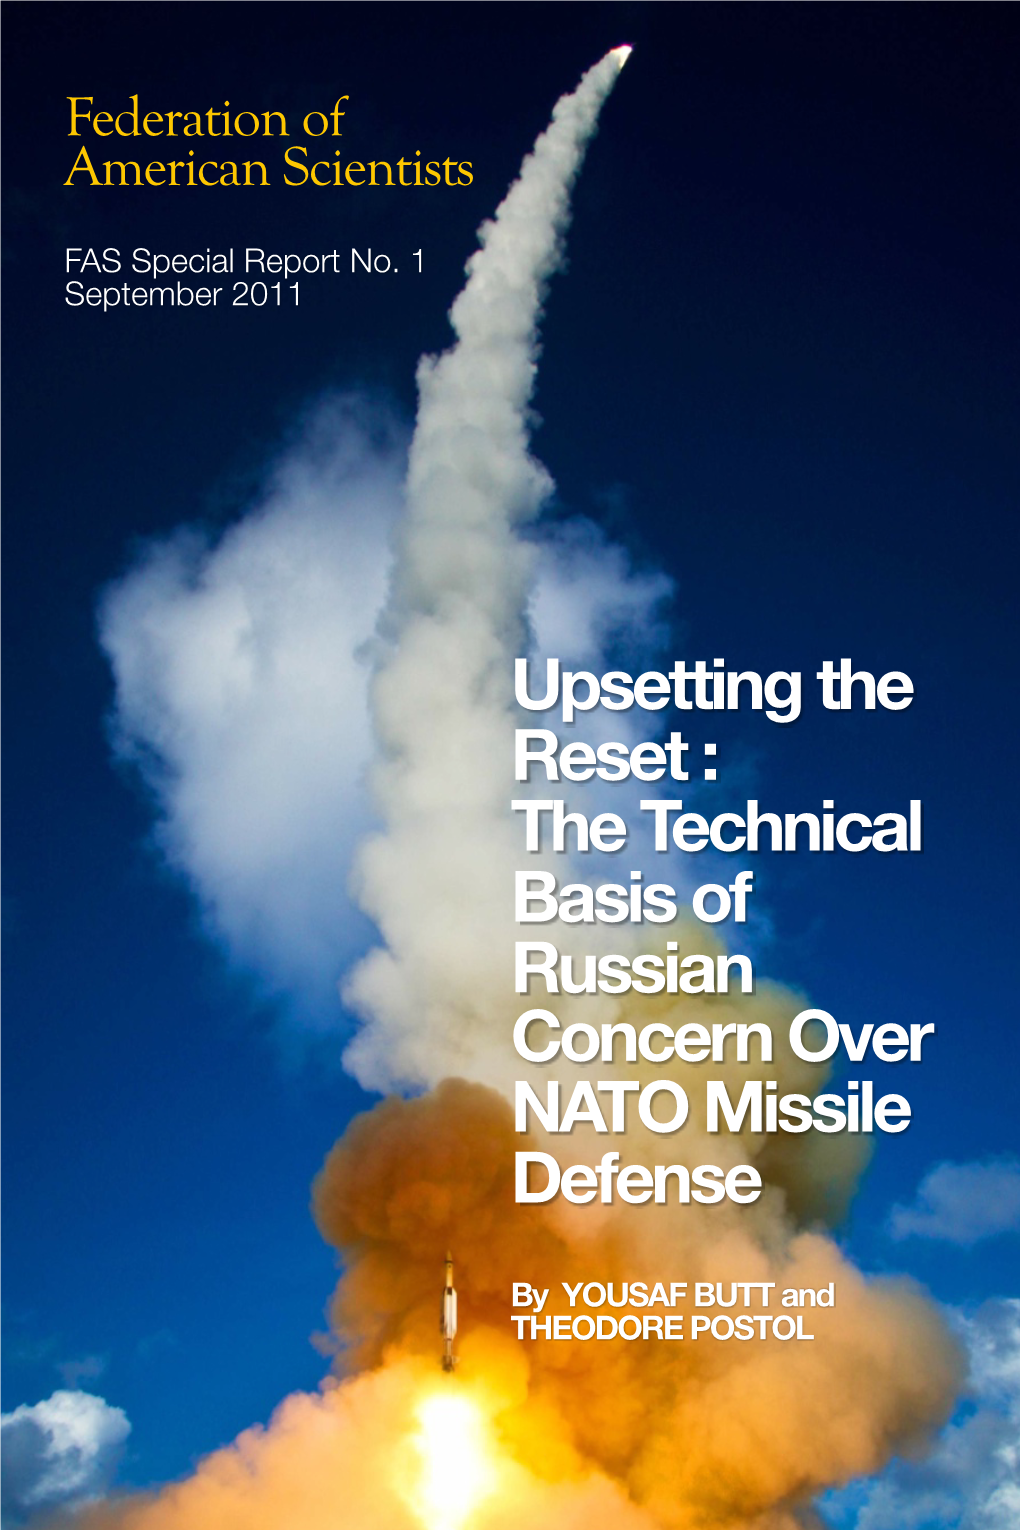 The Technical Basis of Russian Concern Over NATO Missile Defense